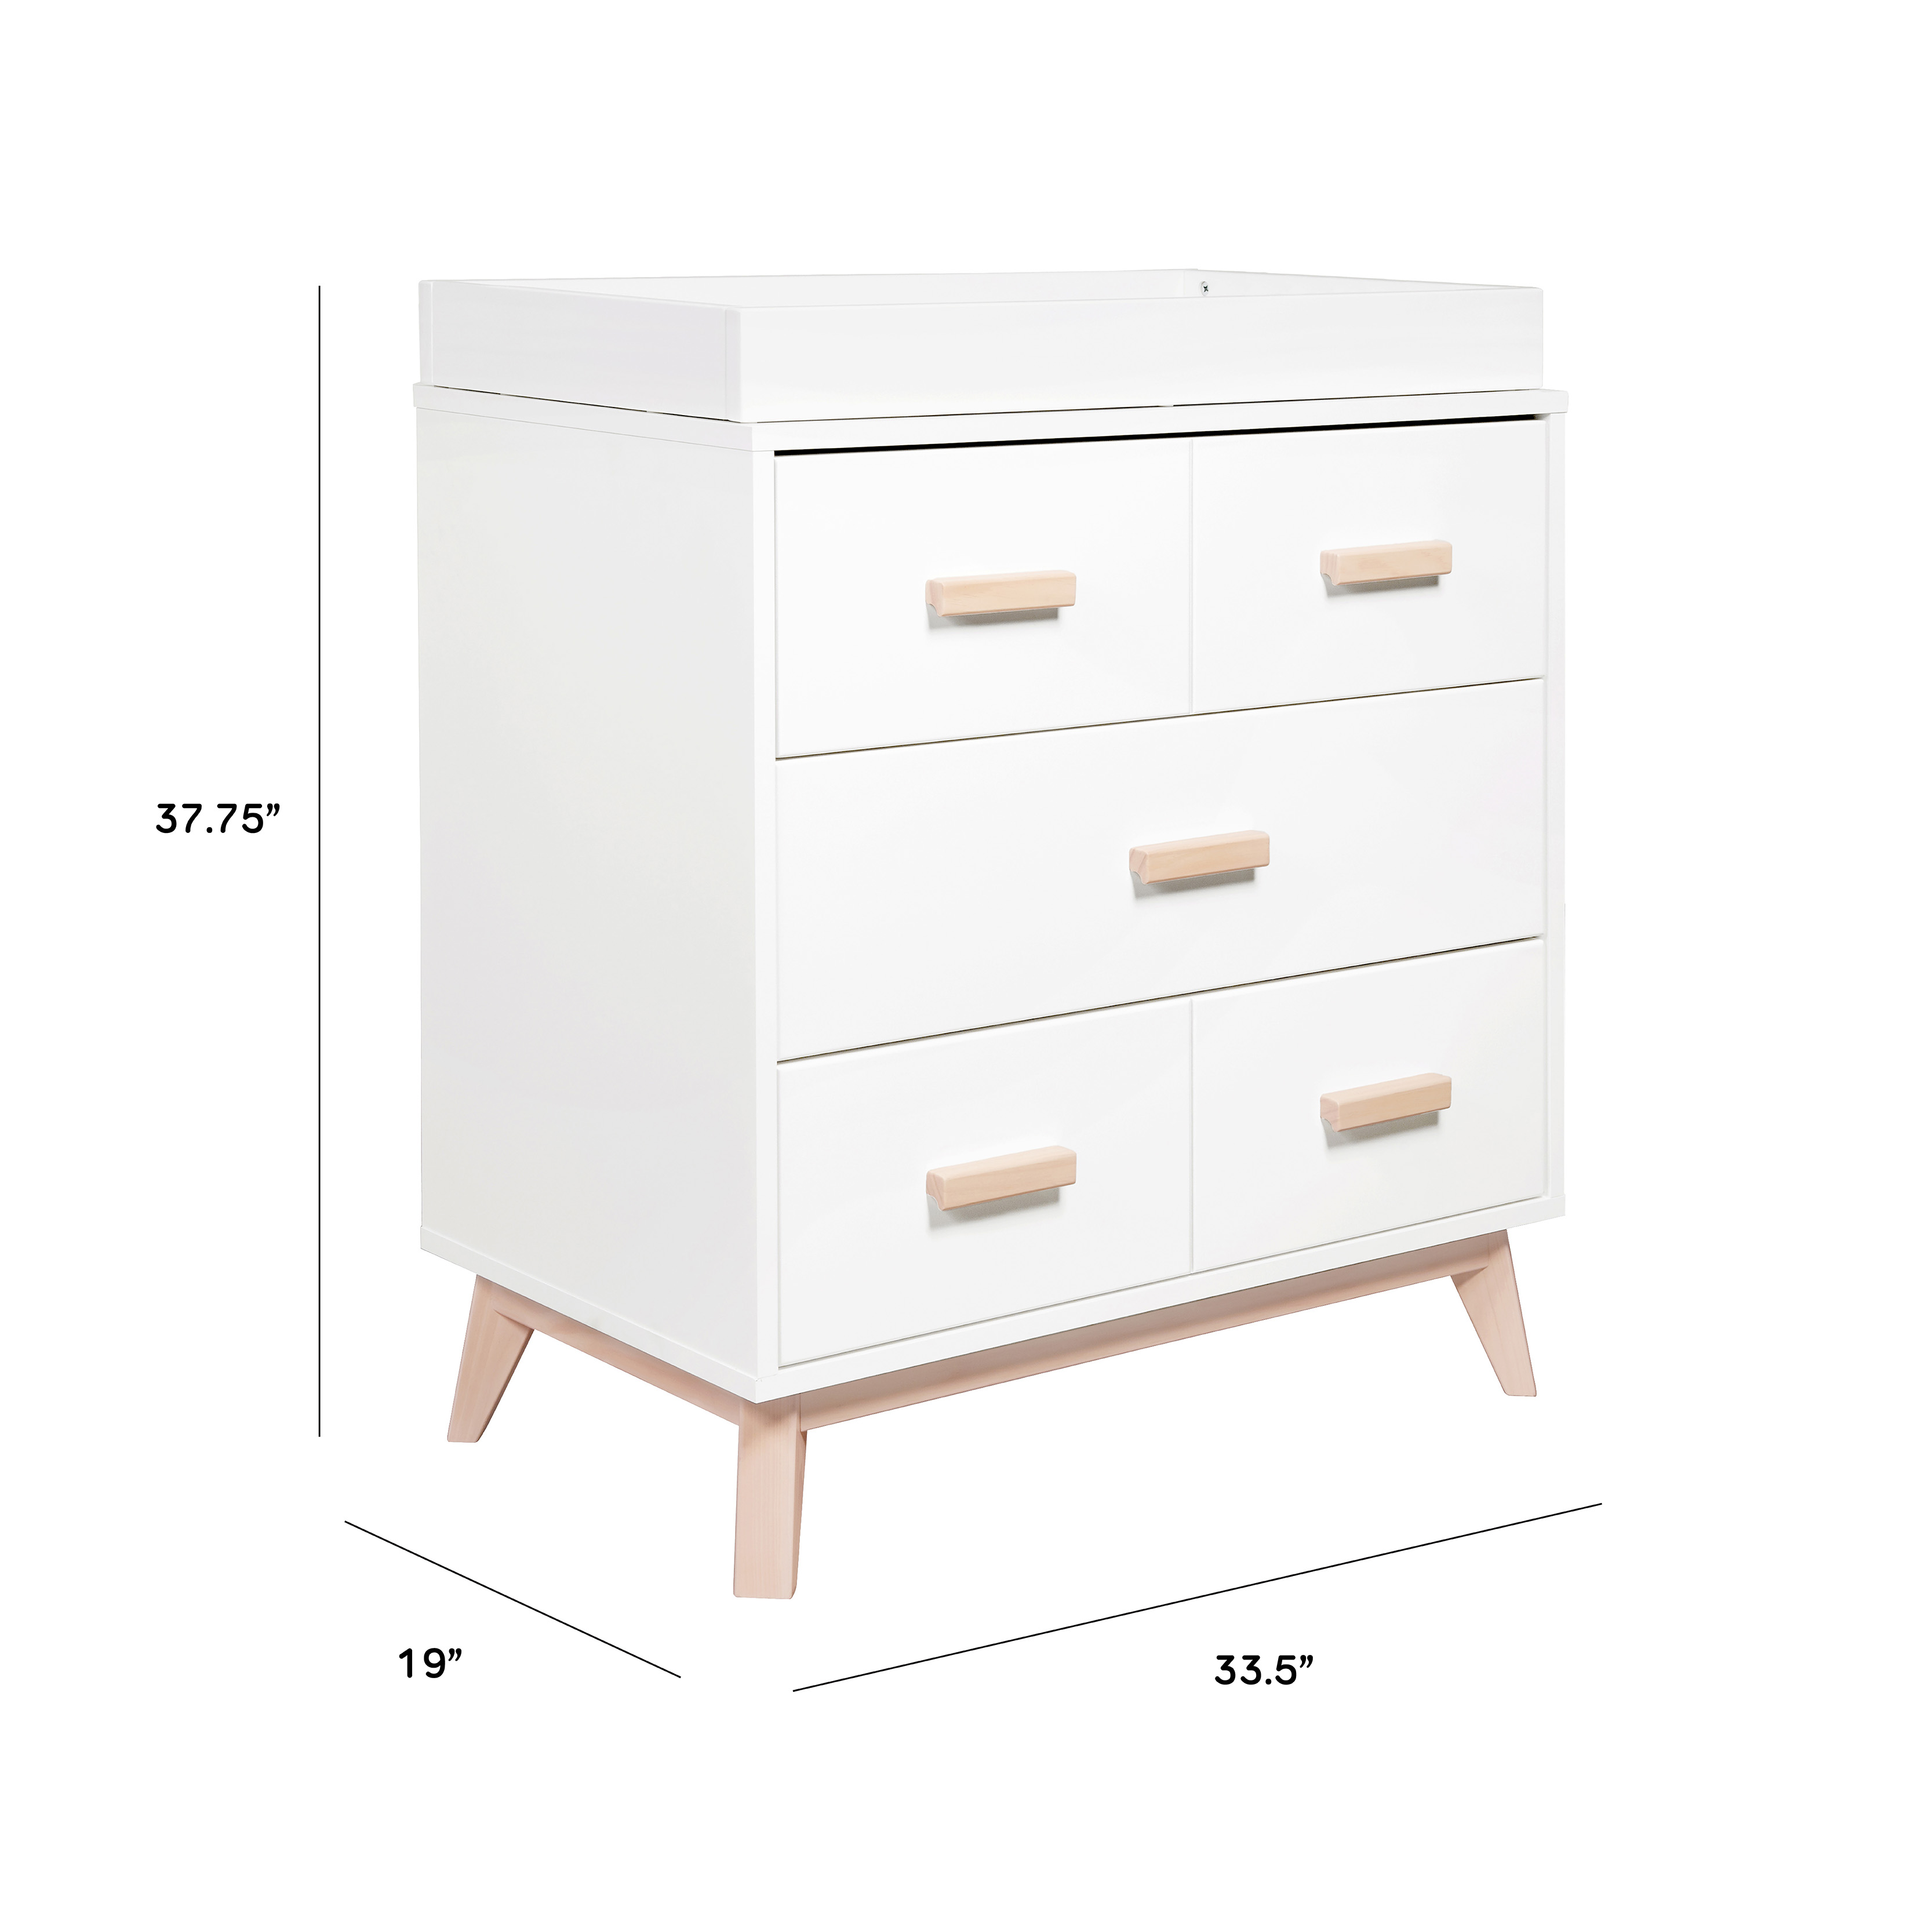 Greenguard Gold Certified Babyletto Scoot 3-Drawer Changer Dresser with Removable Changing Tray in White and Natural Walnut 